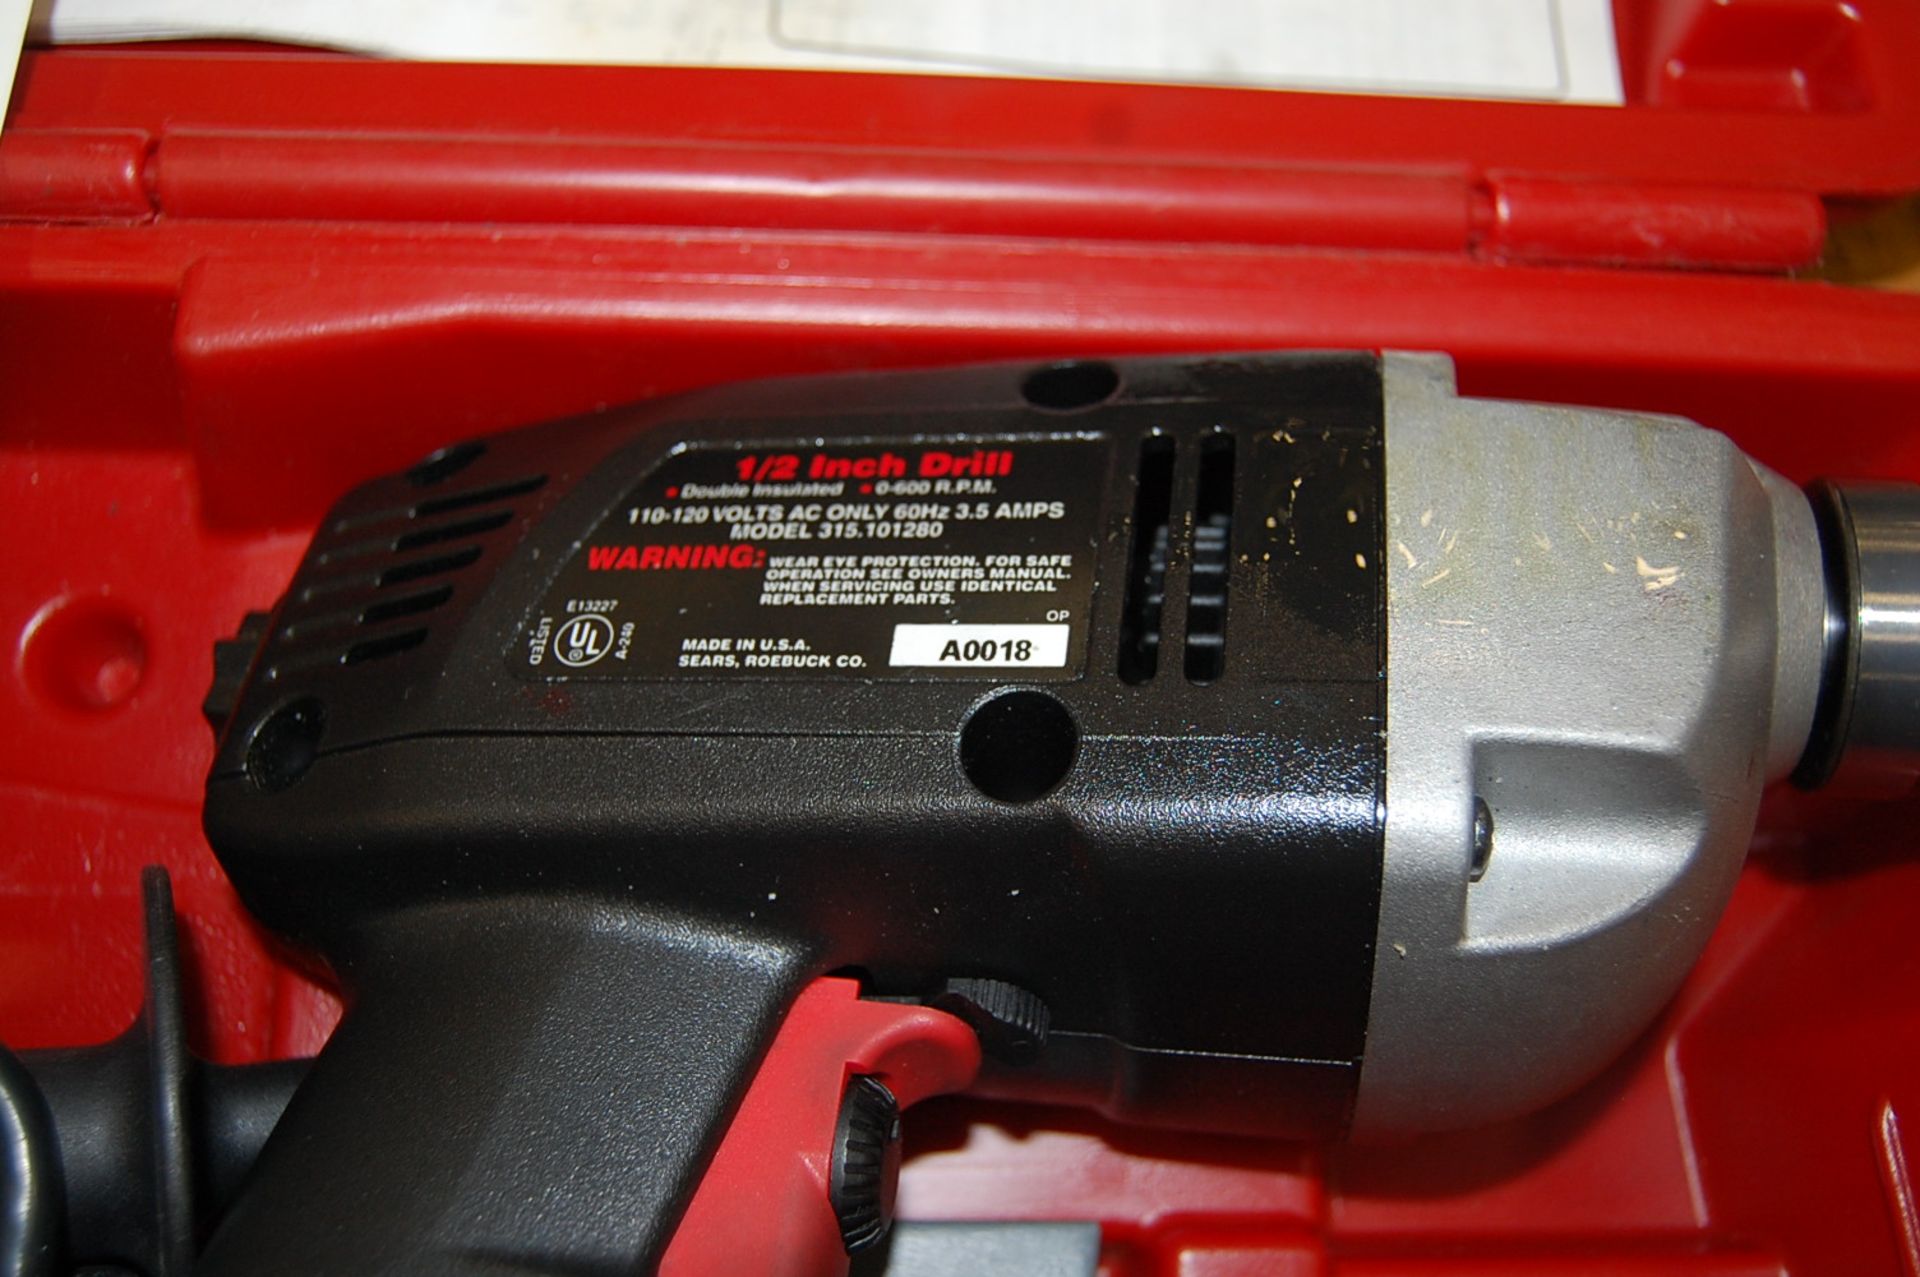 Craftsman Model 315.101280 Electric 1/2" Drill - Image 3 of 3